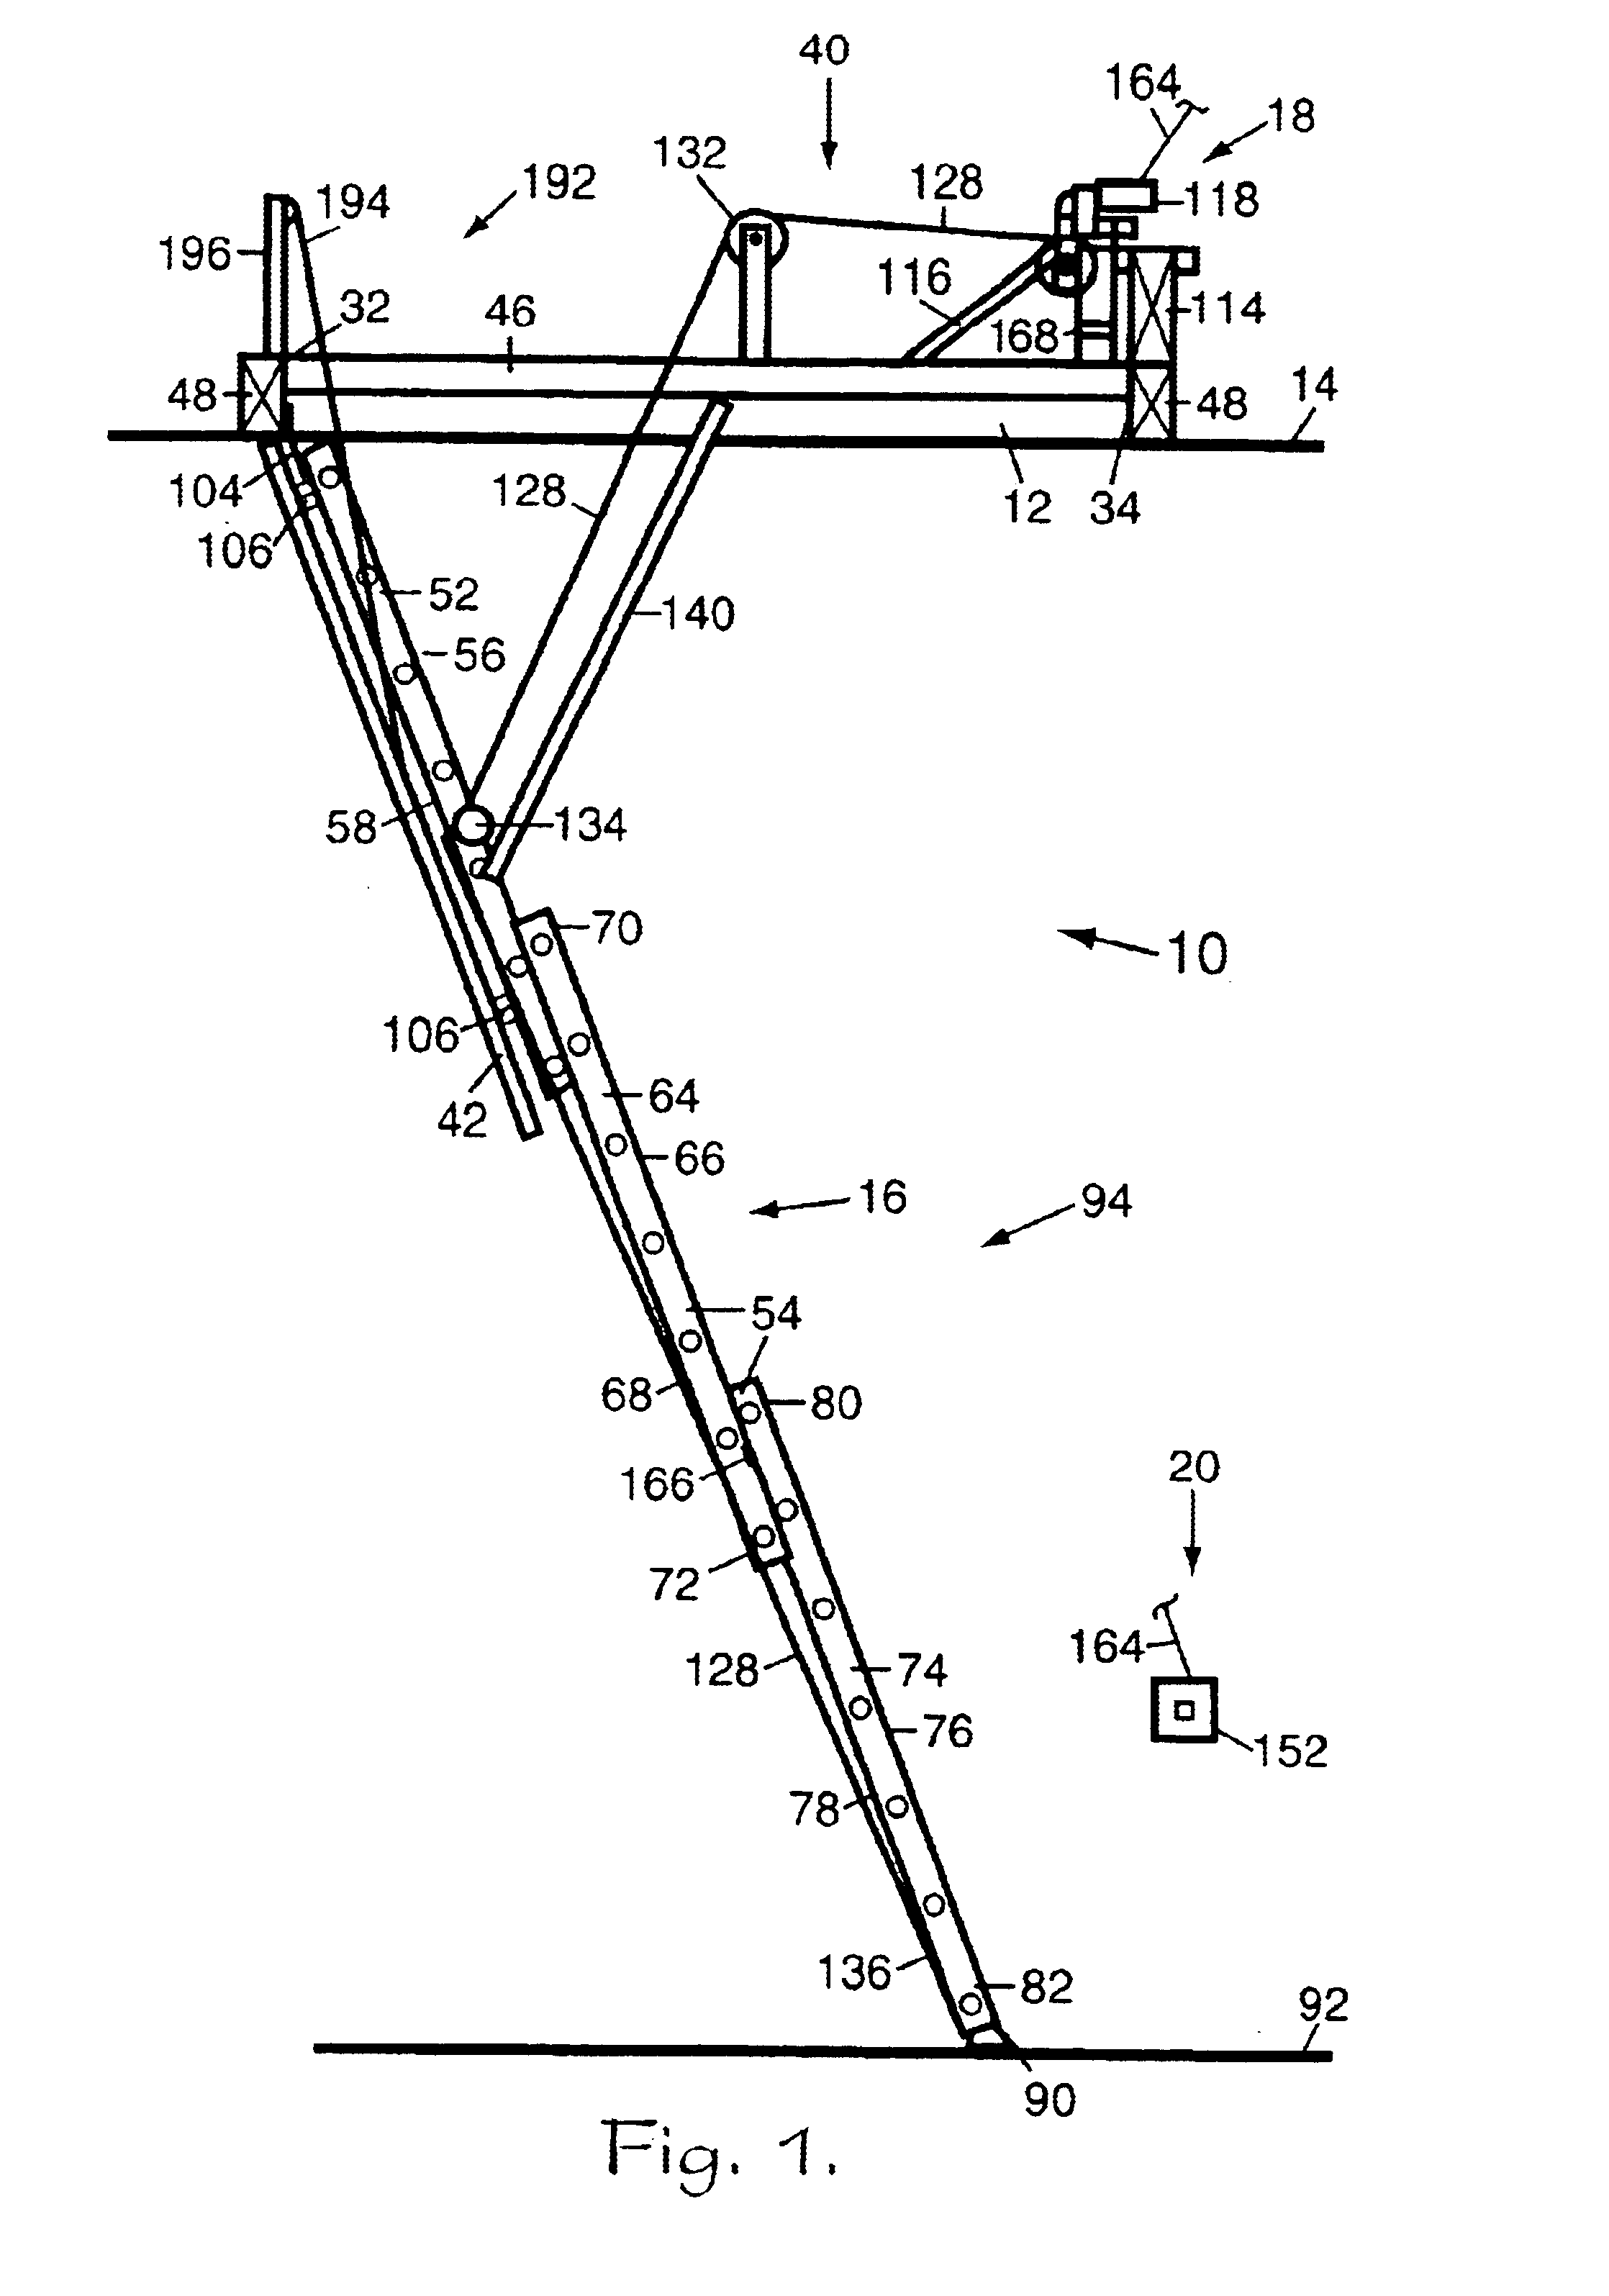 Motorized access apparatus for elevated areas